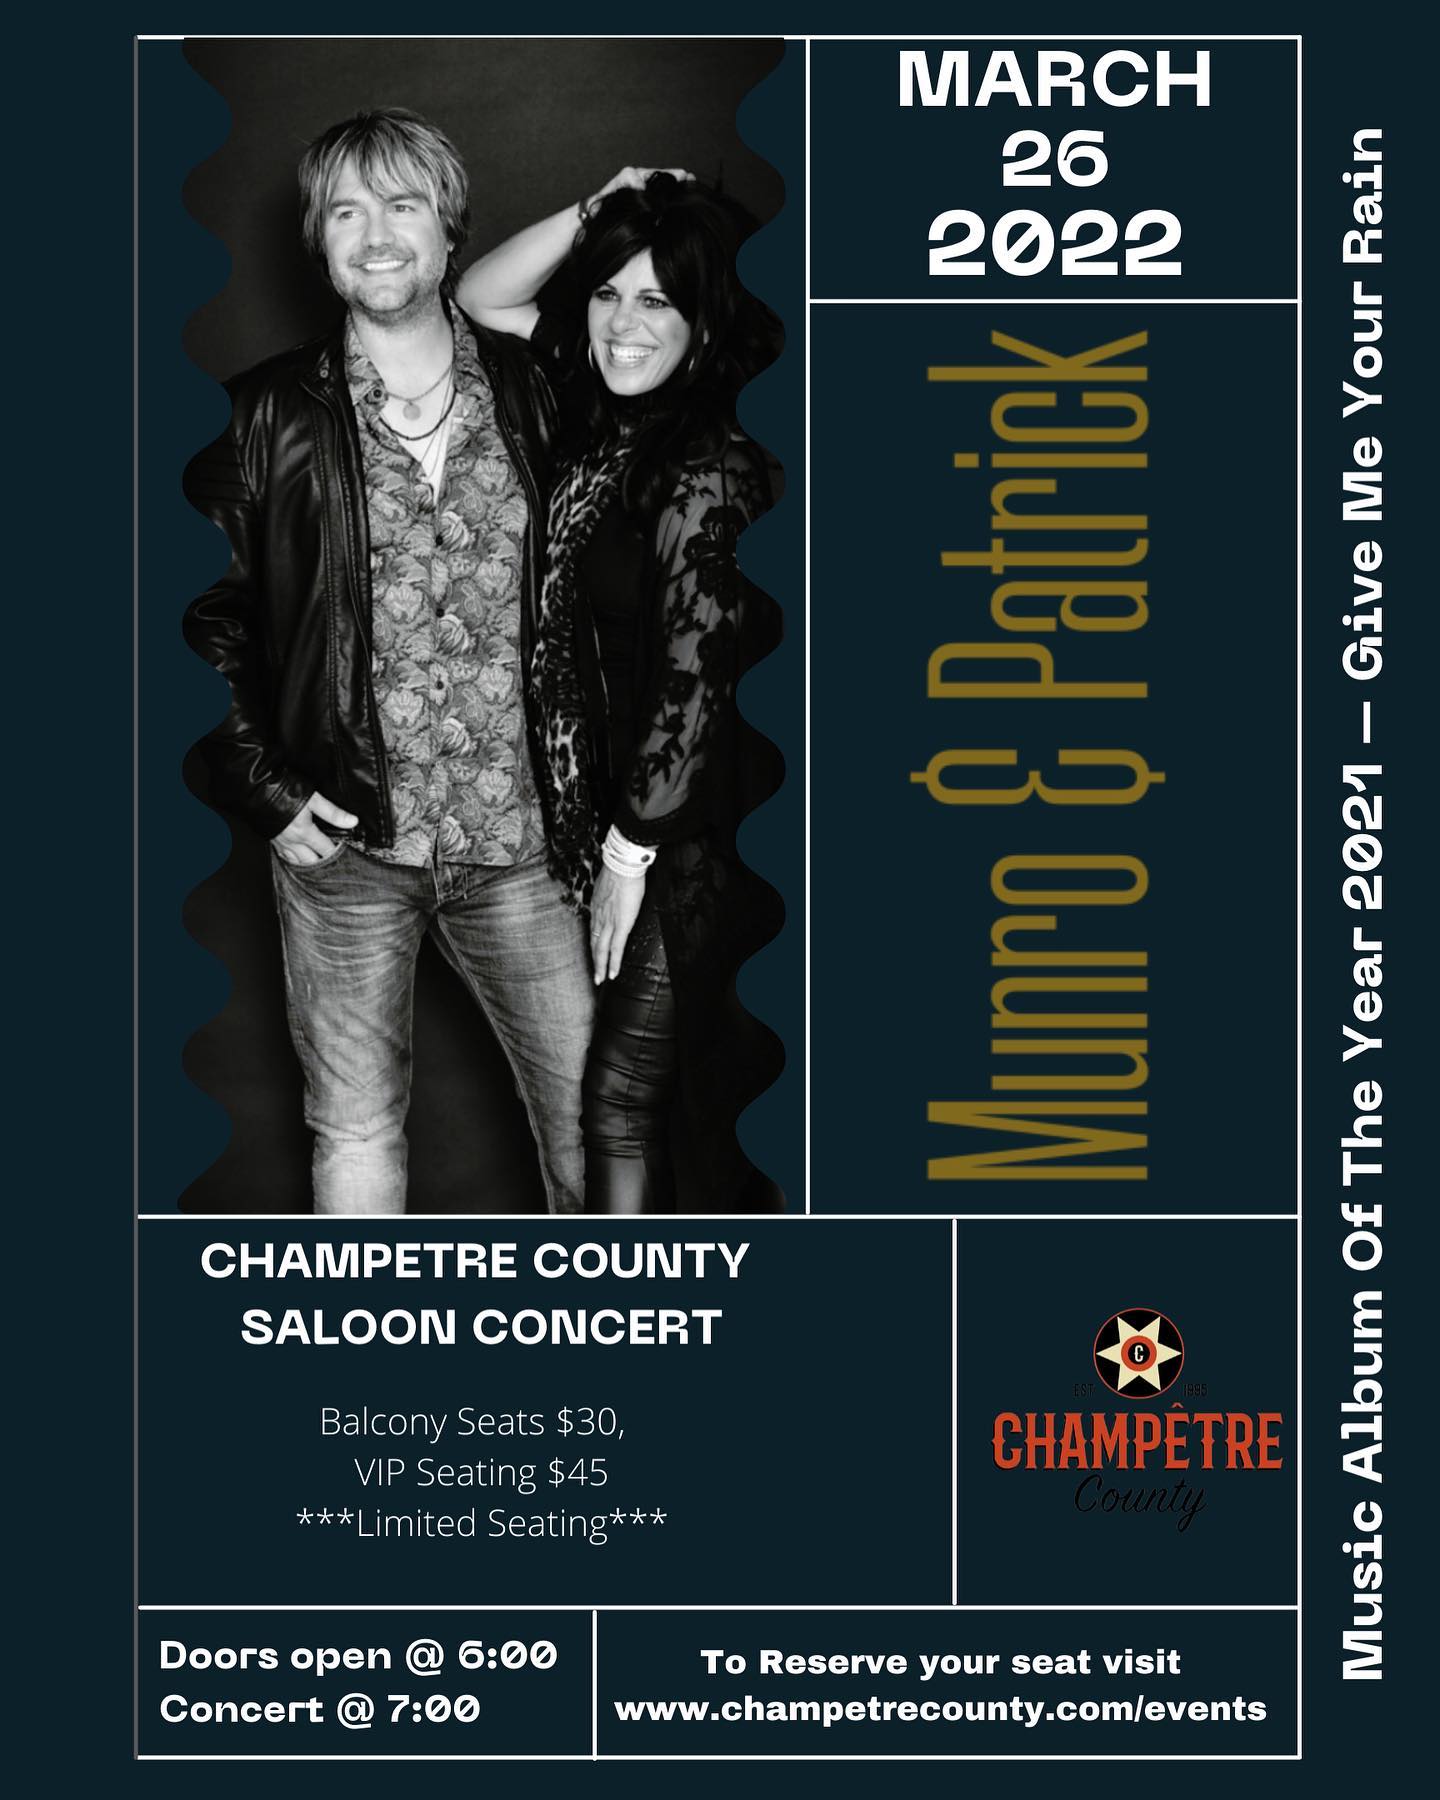 Champetre County's Saloon Concert